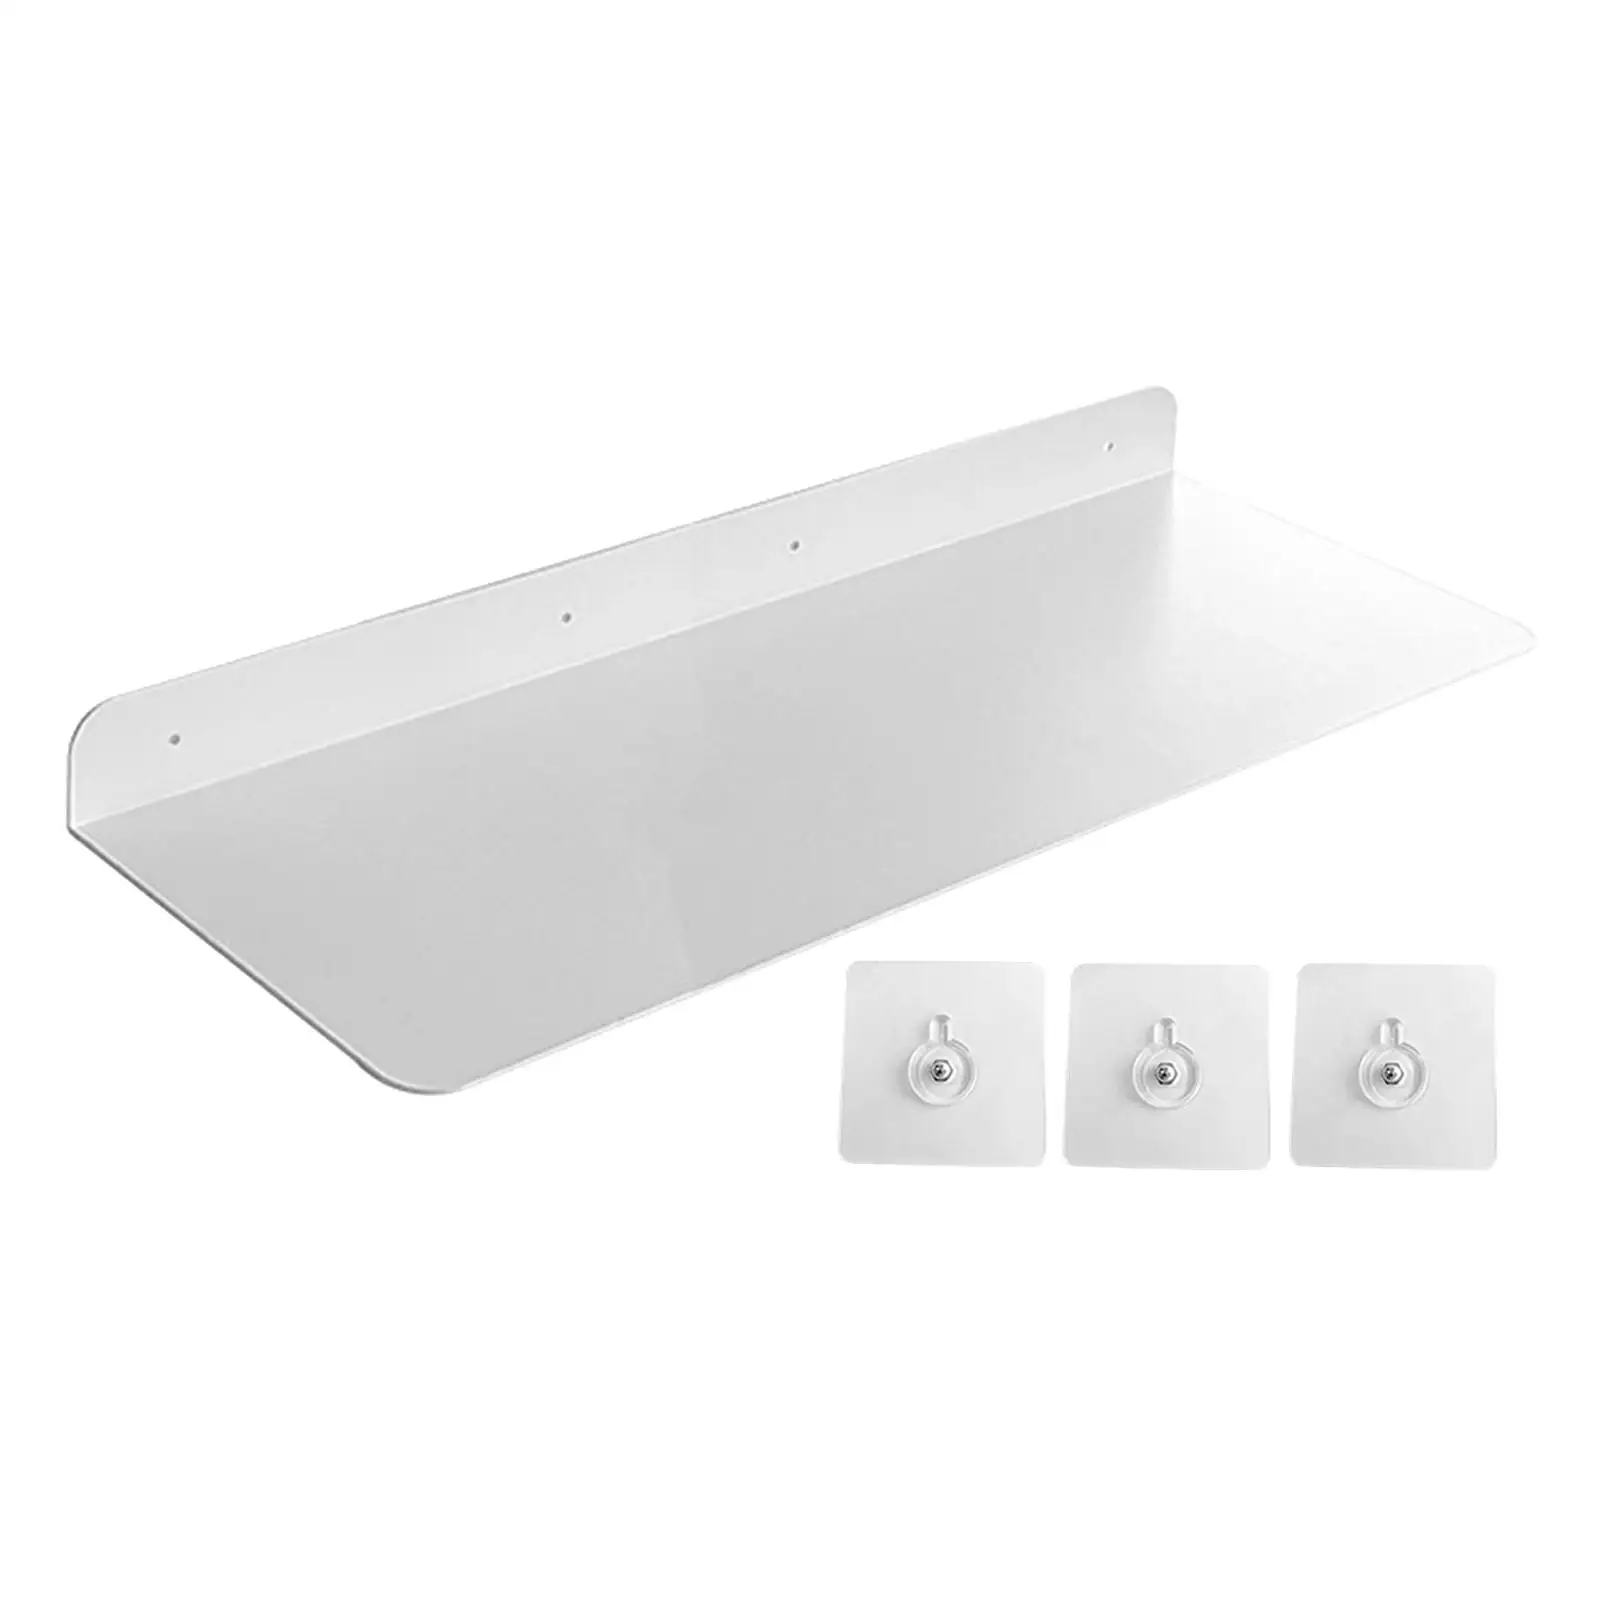 Extension Plate Closet Organizer Home Decorative Rack Durable Edge Banding Easy to Install Storage Rack for Kitchen Cabinet